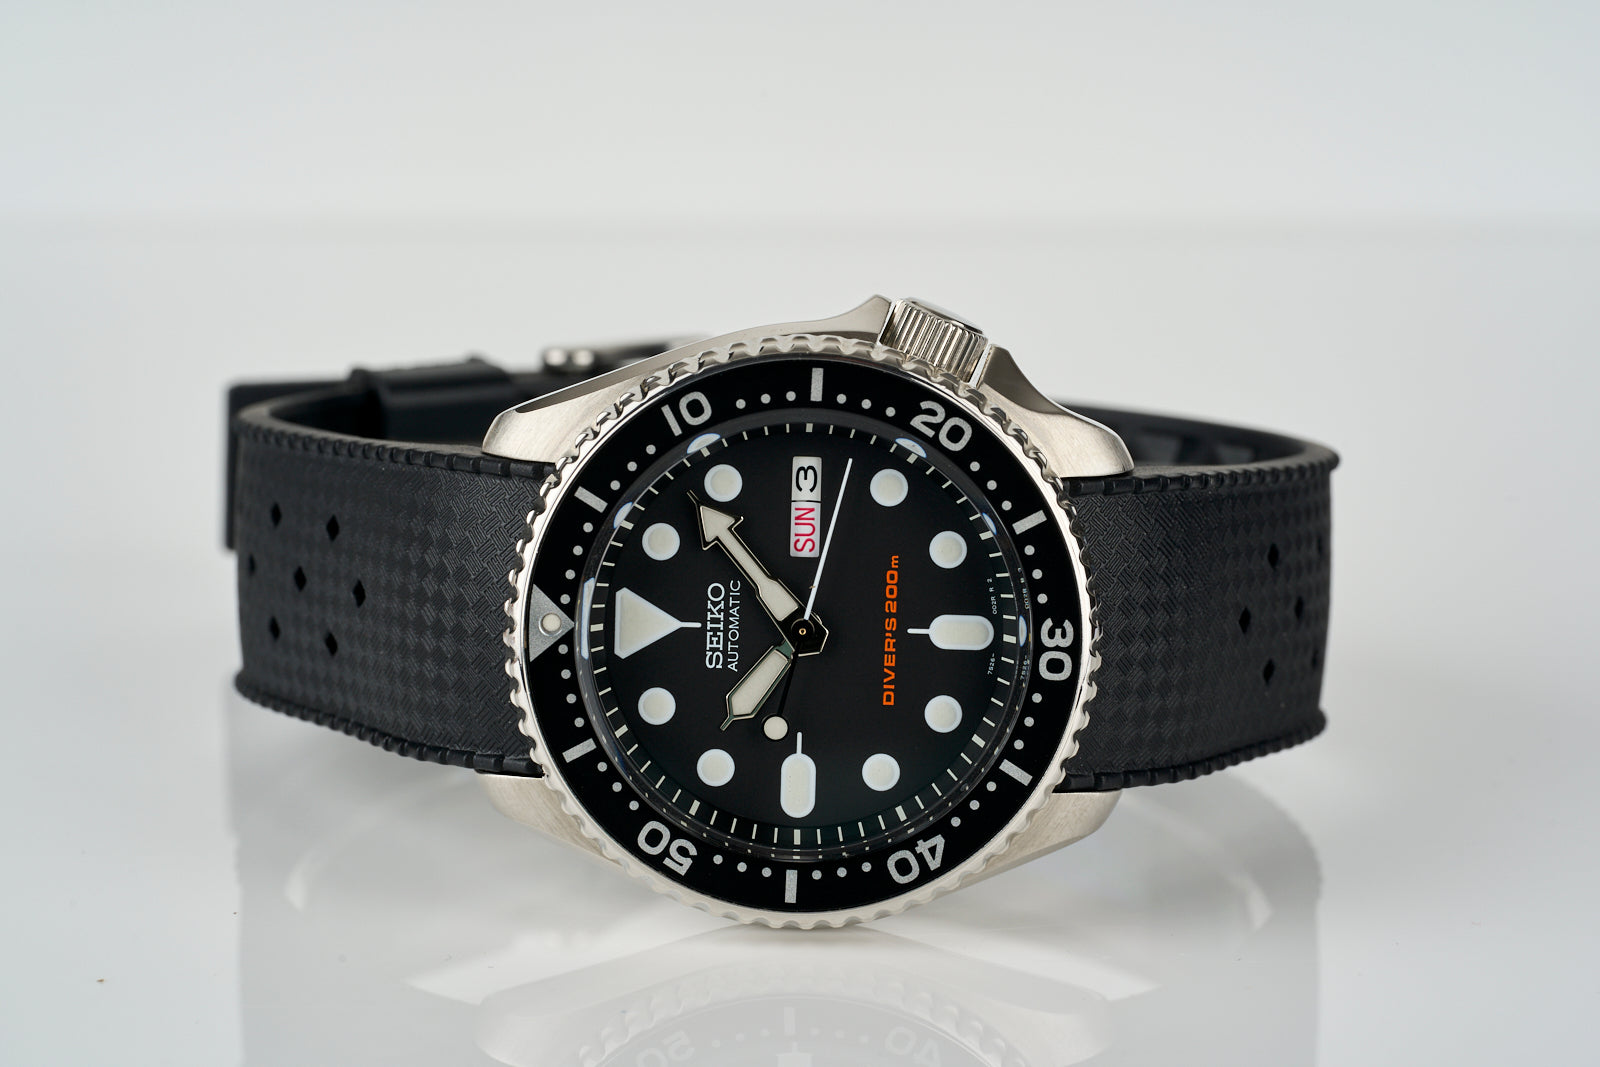 Skx007j] Got The Curved Uncle Seiko Rubber Strap, Much Better Than The OE  Strap And Used The OE Buckle To Give It The Period Correct This Might Do  For Now 